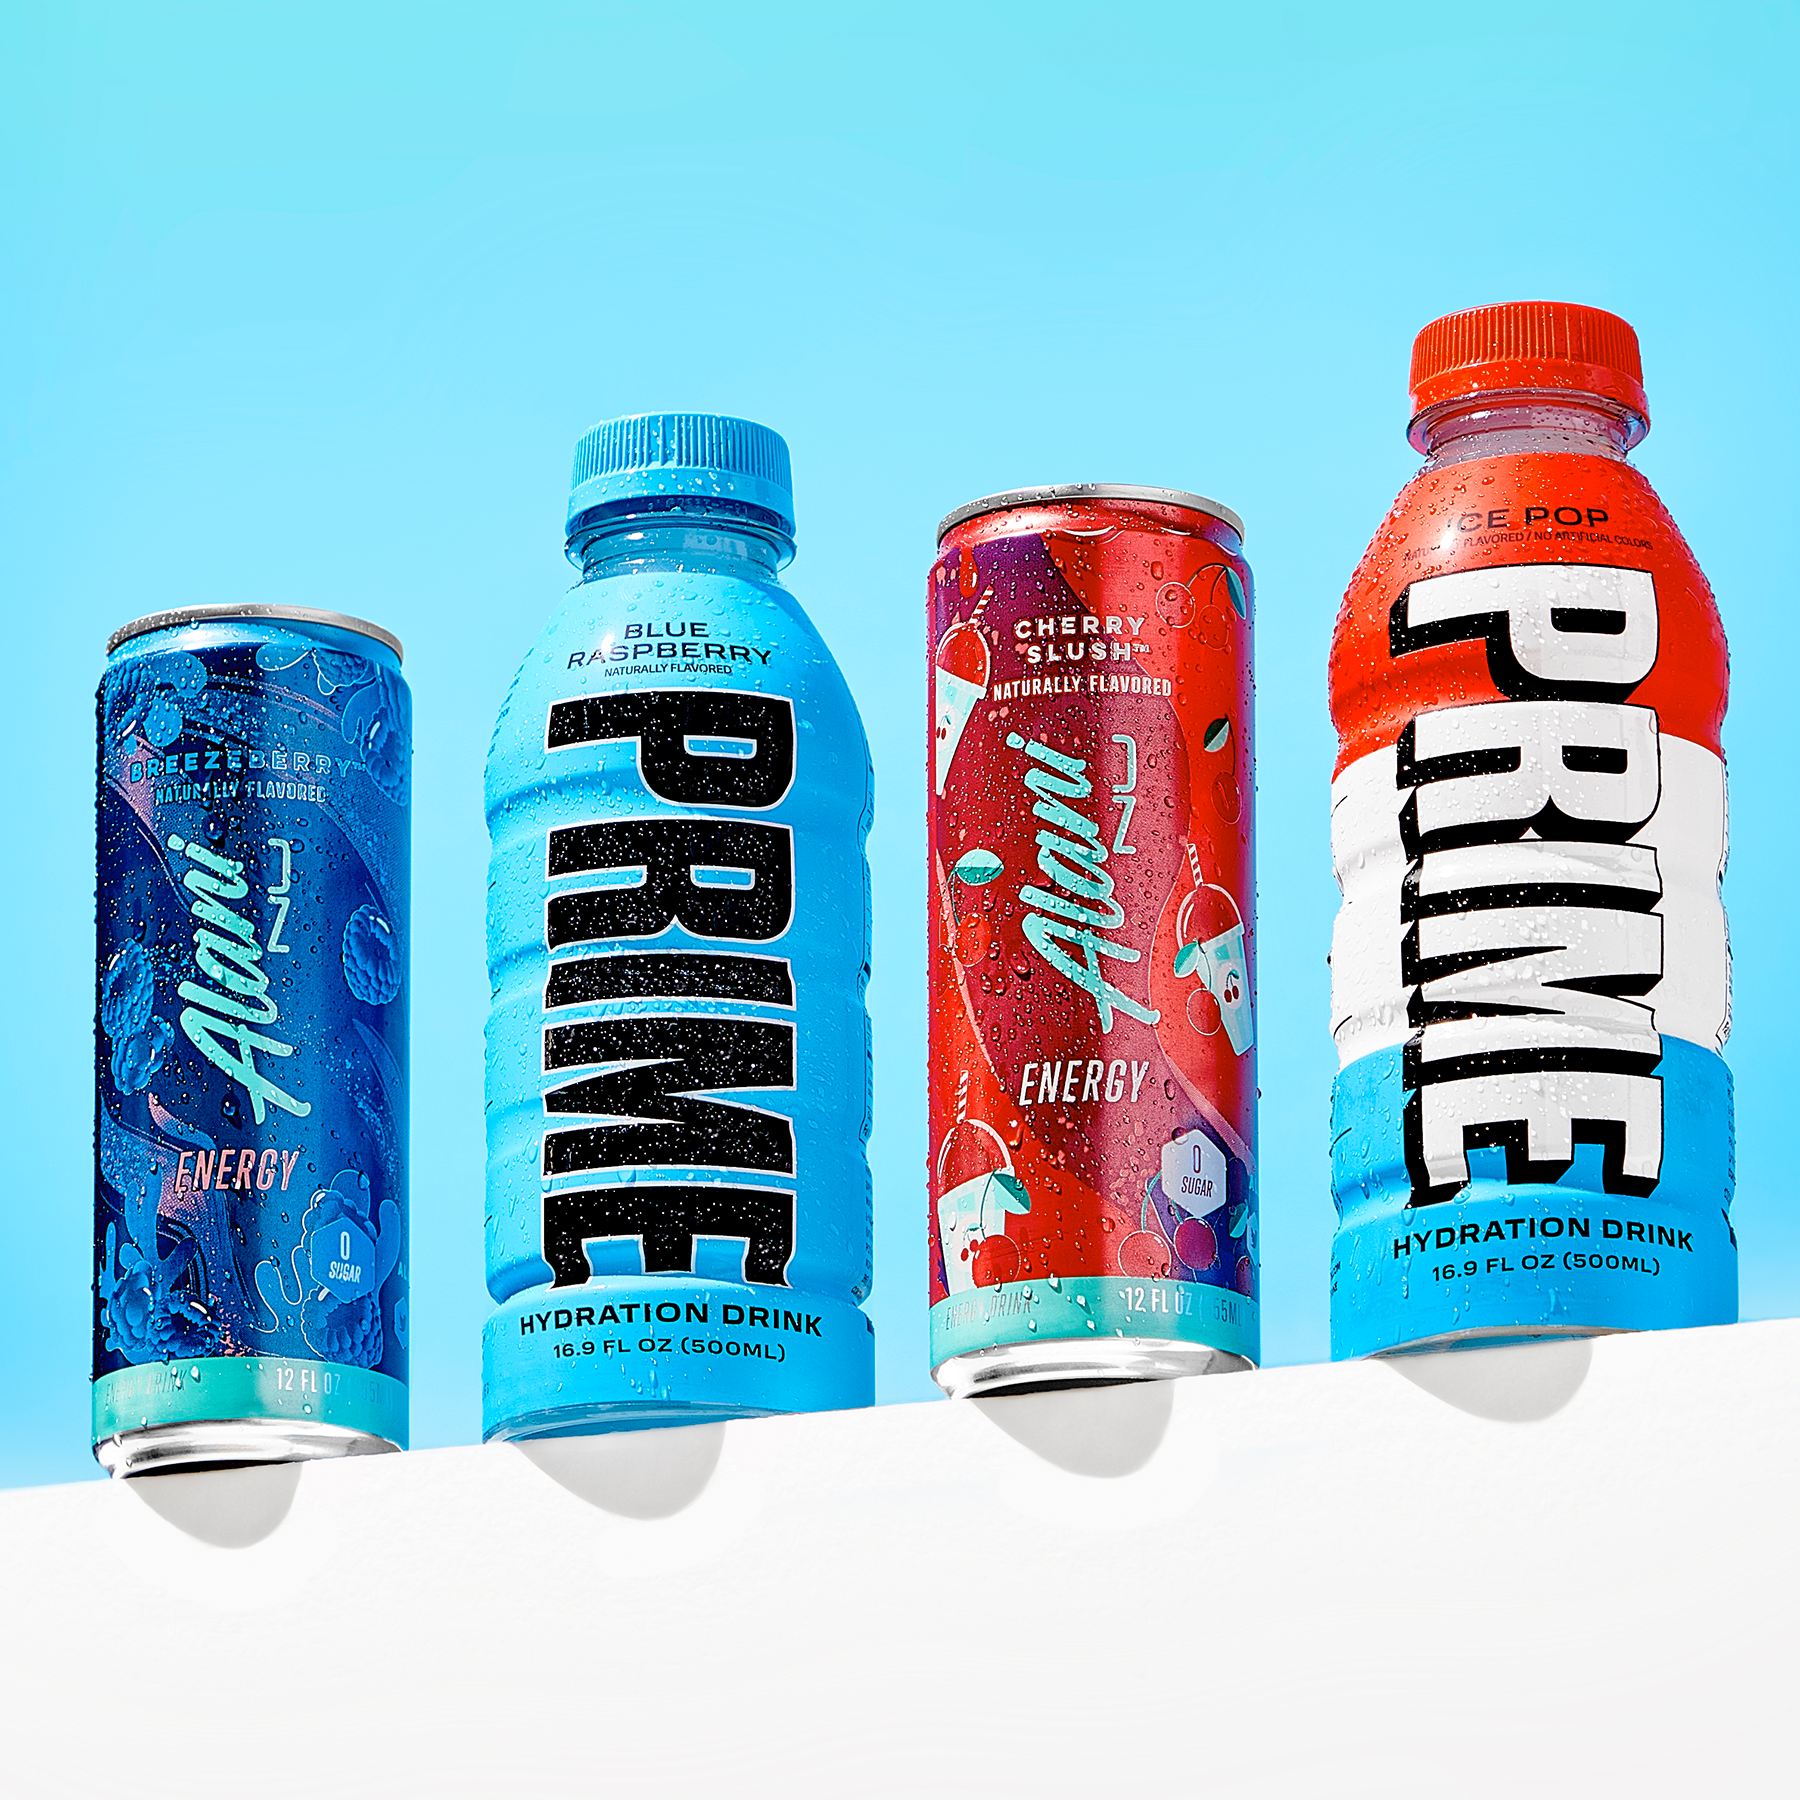  Displayed side by side are four refreshment options: a Breezberry energy drink, Prime Hydration in Blue Raspberry, a Cherry Slush-flavored energy drink, and Prime Hydration featuring the Rocket Pop flavor.